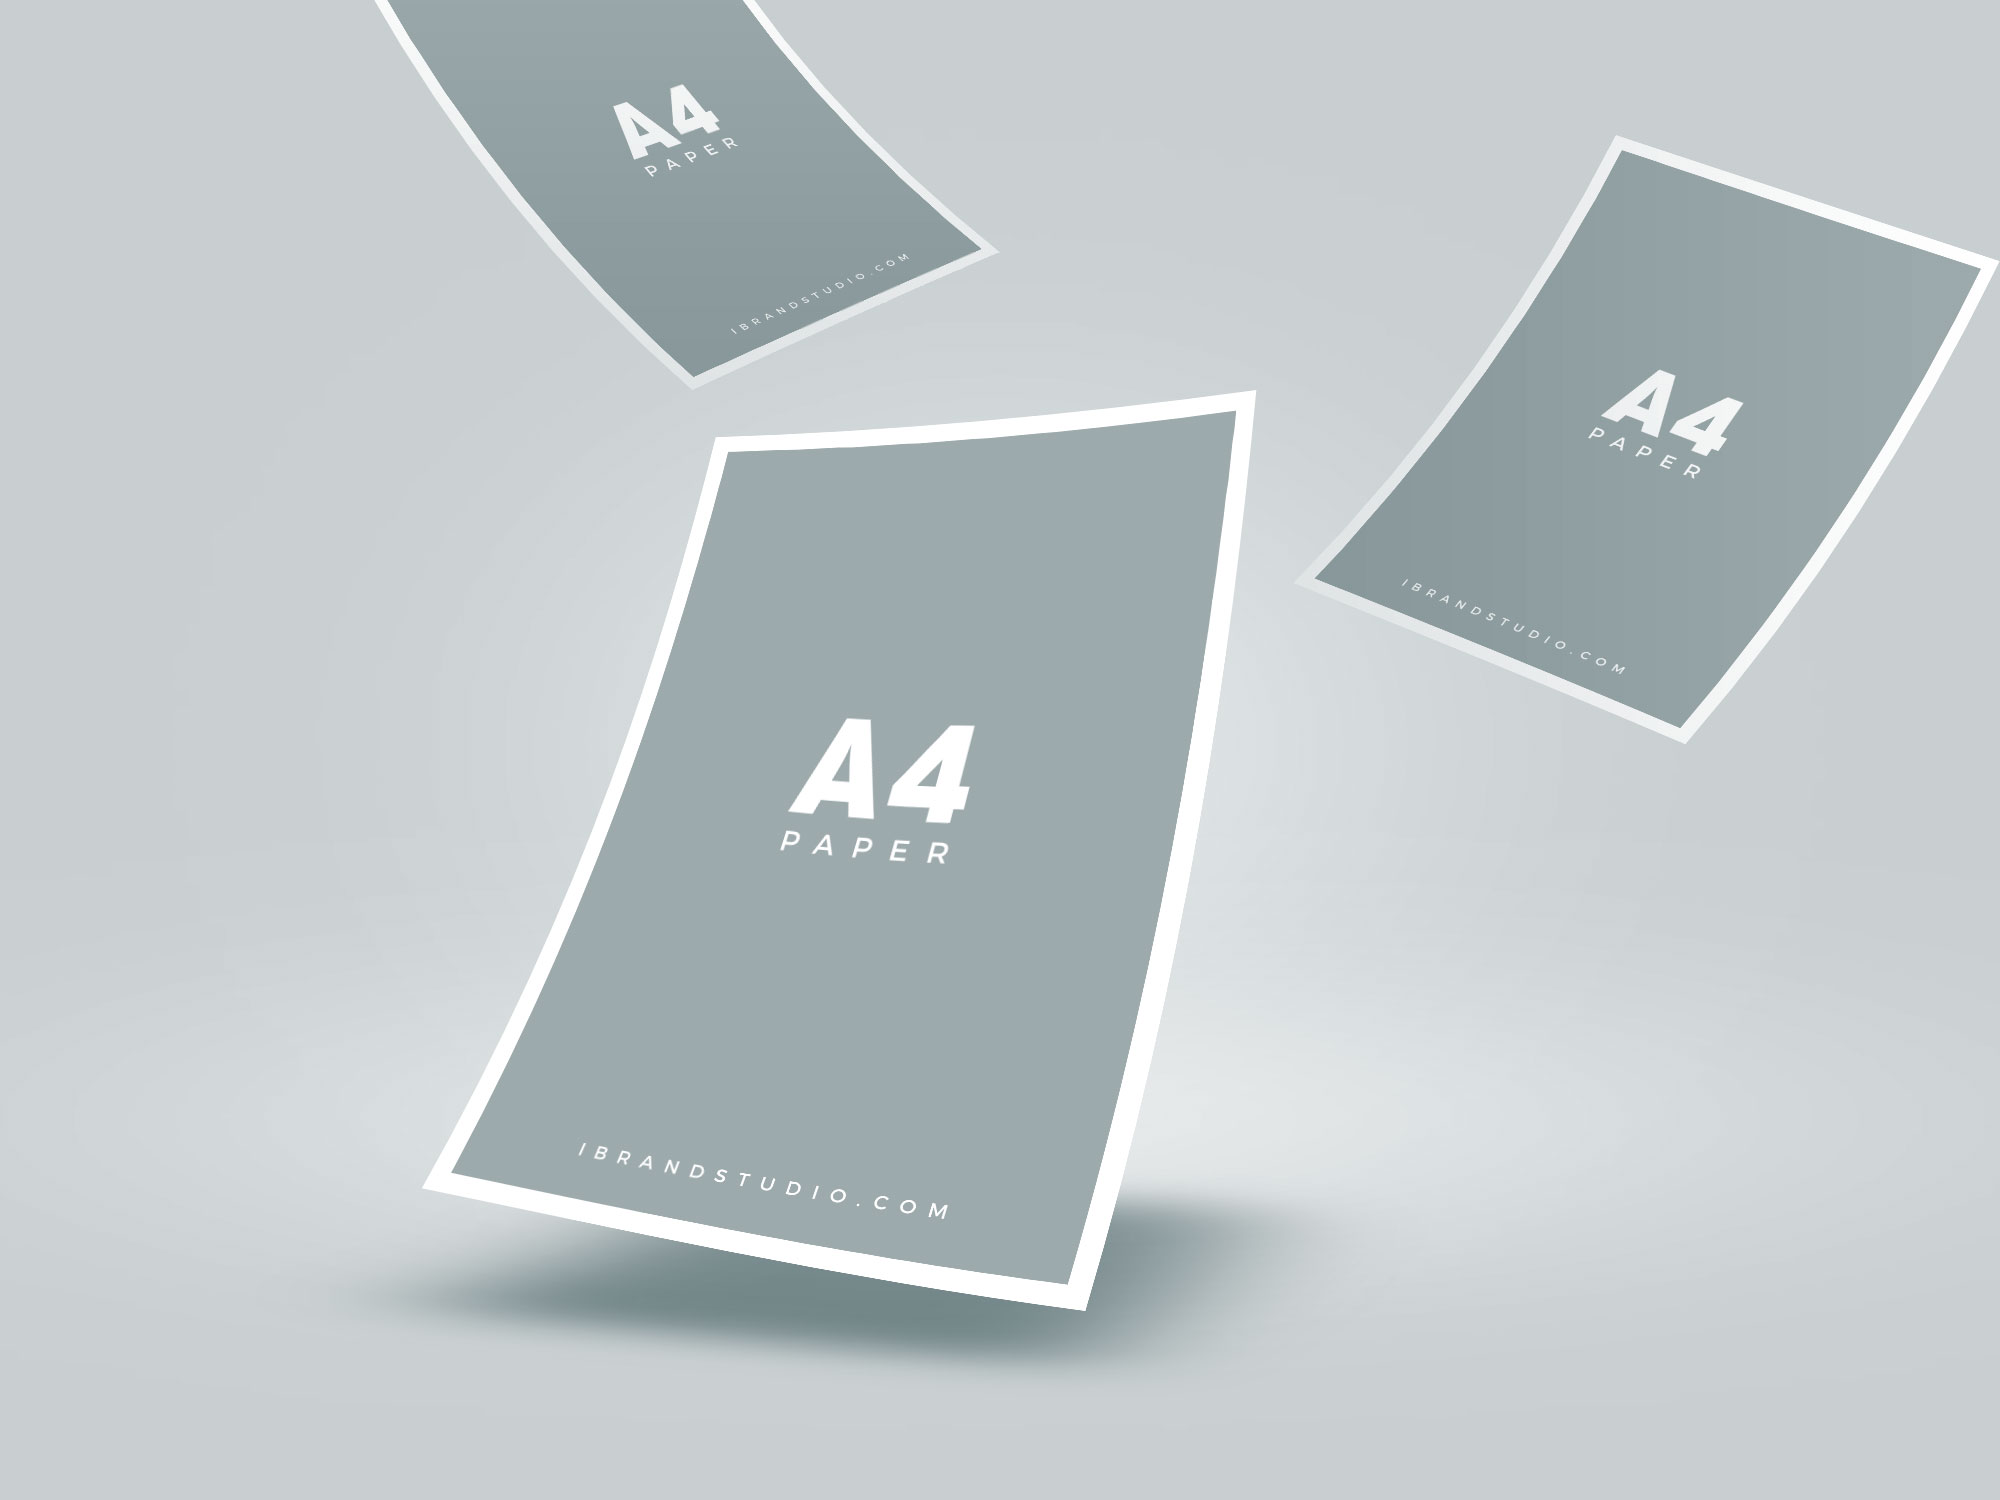 Download Floating A4 Paper Mockup Free Mockup Yellowimages Mockups